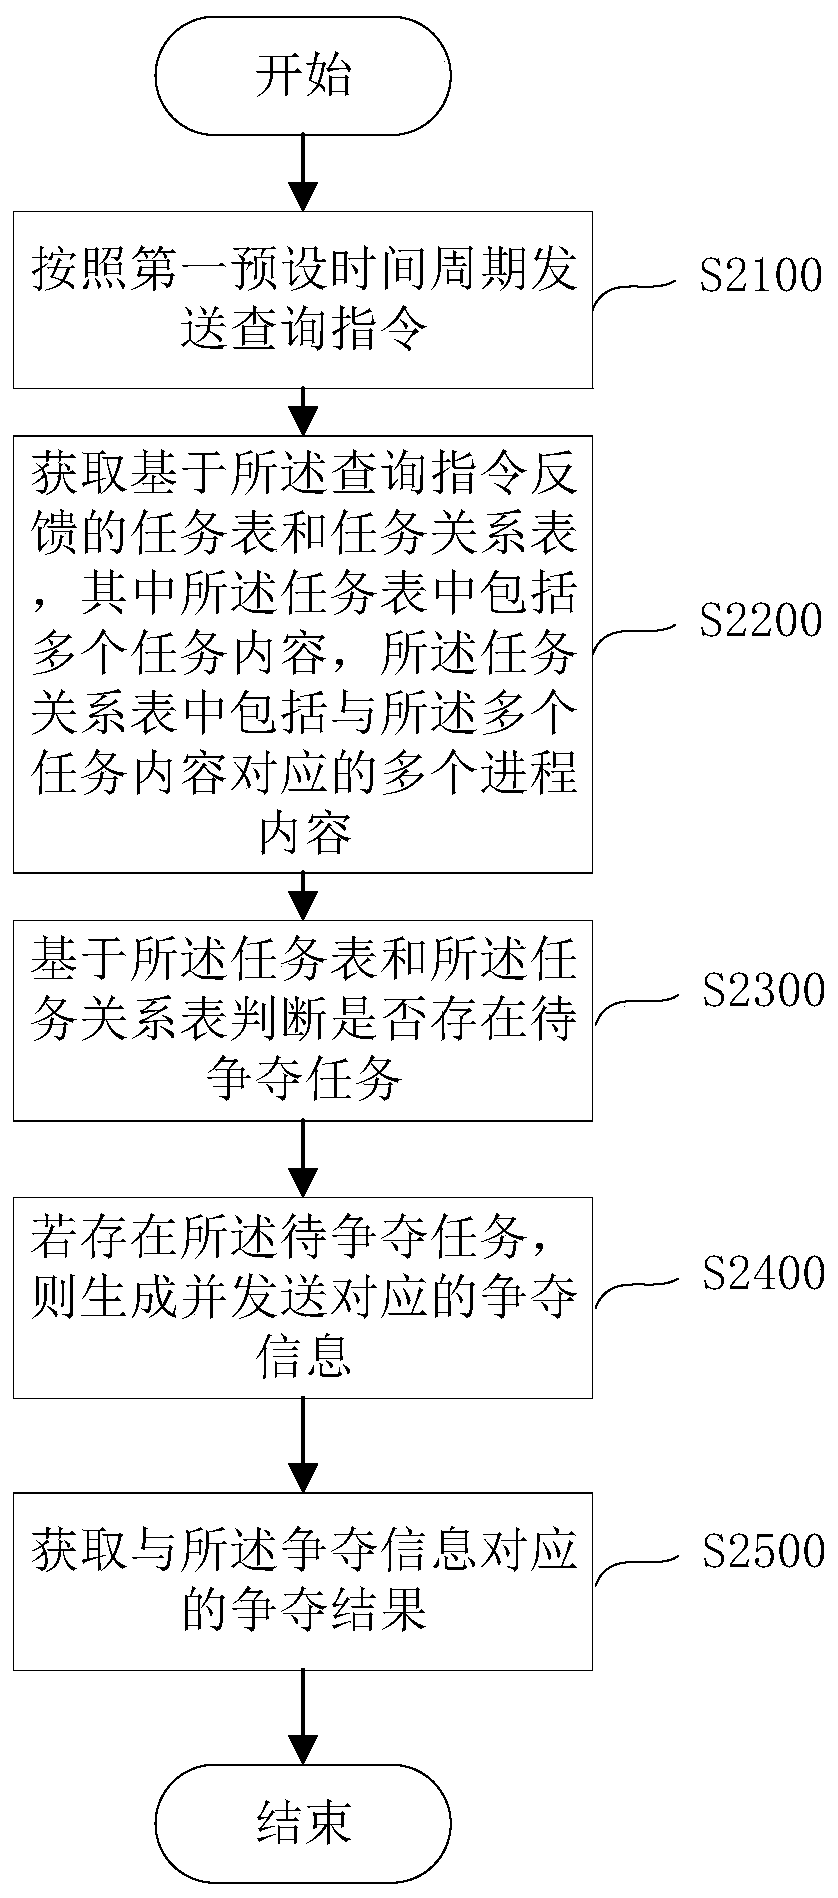 Multi-point deployment process management method and process competition method